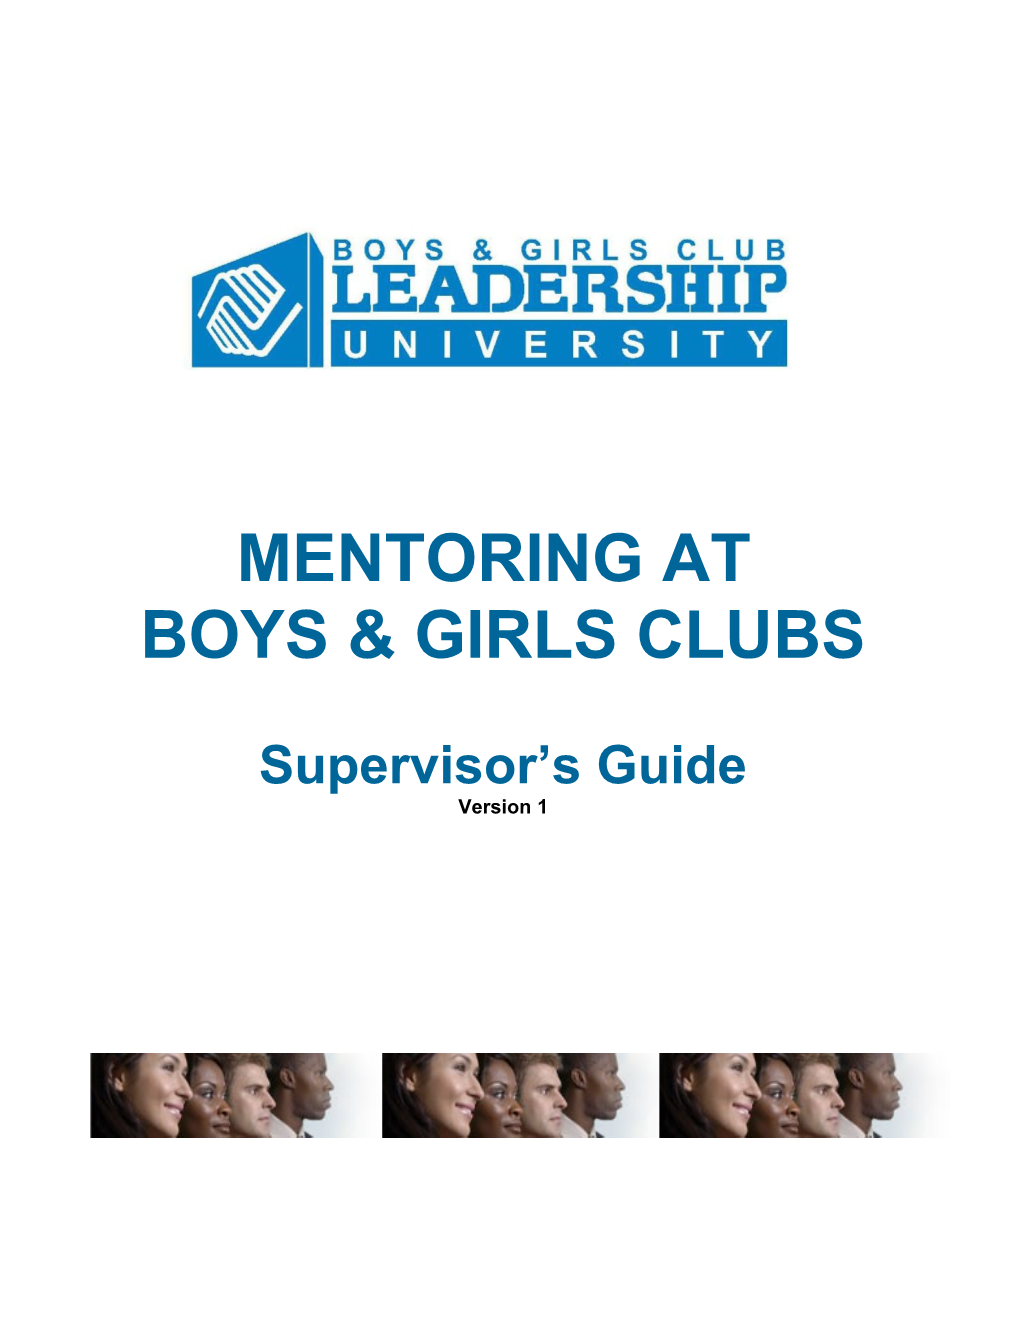 Supervisor's Guide to Mentoring